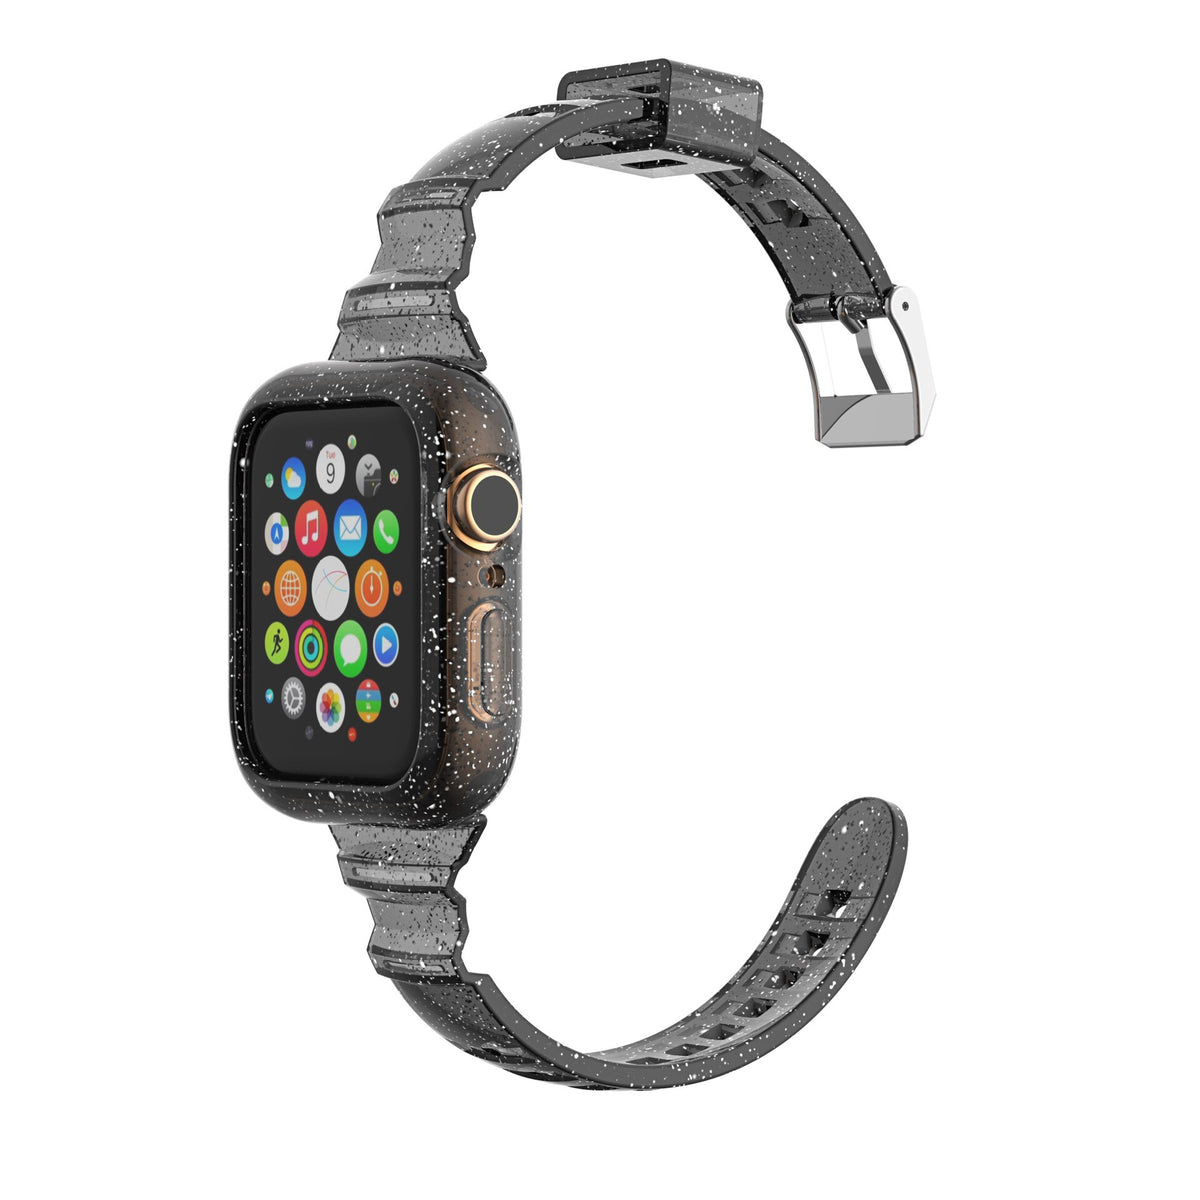 Apple Watch Silicone Band/Mod kit